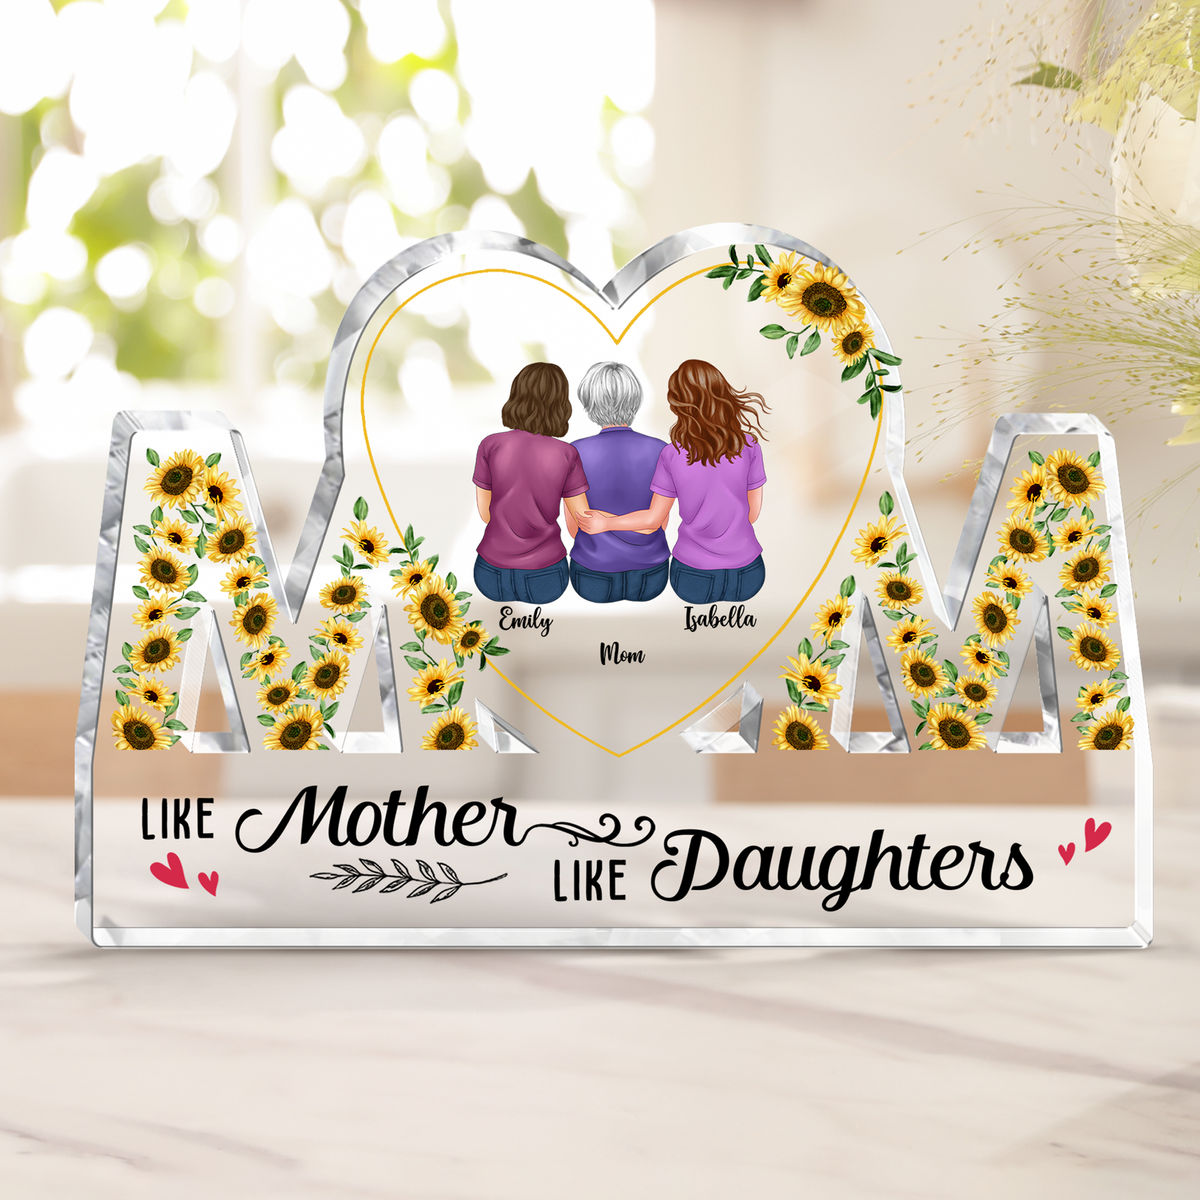 Gifts for Mom - Mother and Daughters forever linked together - Mother's Day Gifts, Birthday Gifts for Mom_1